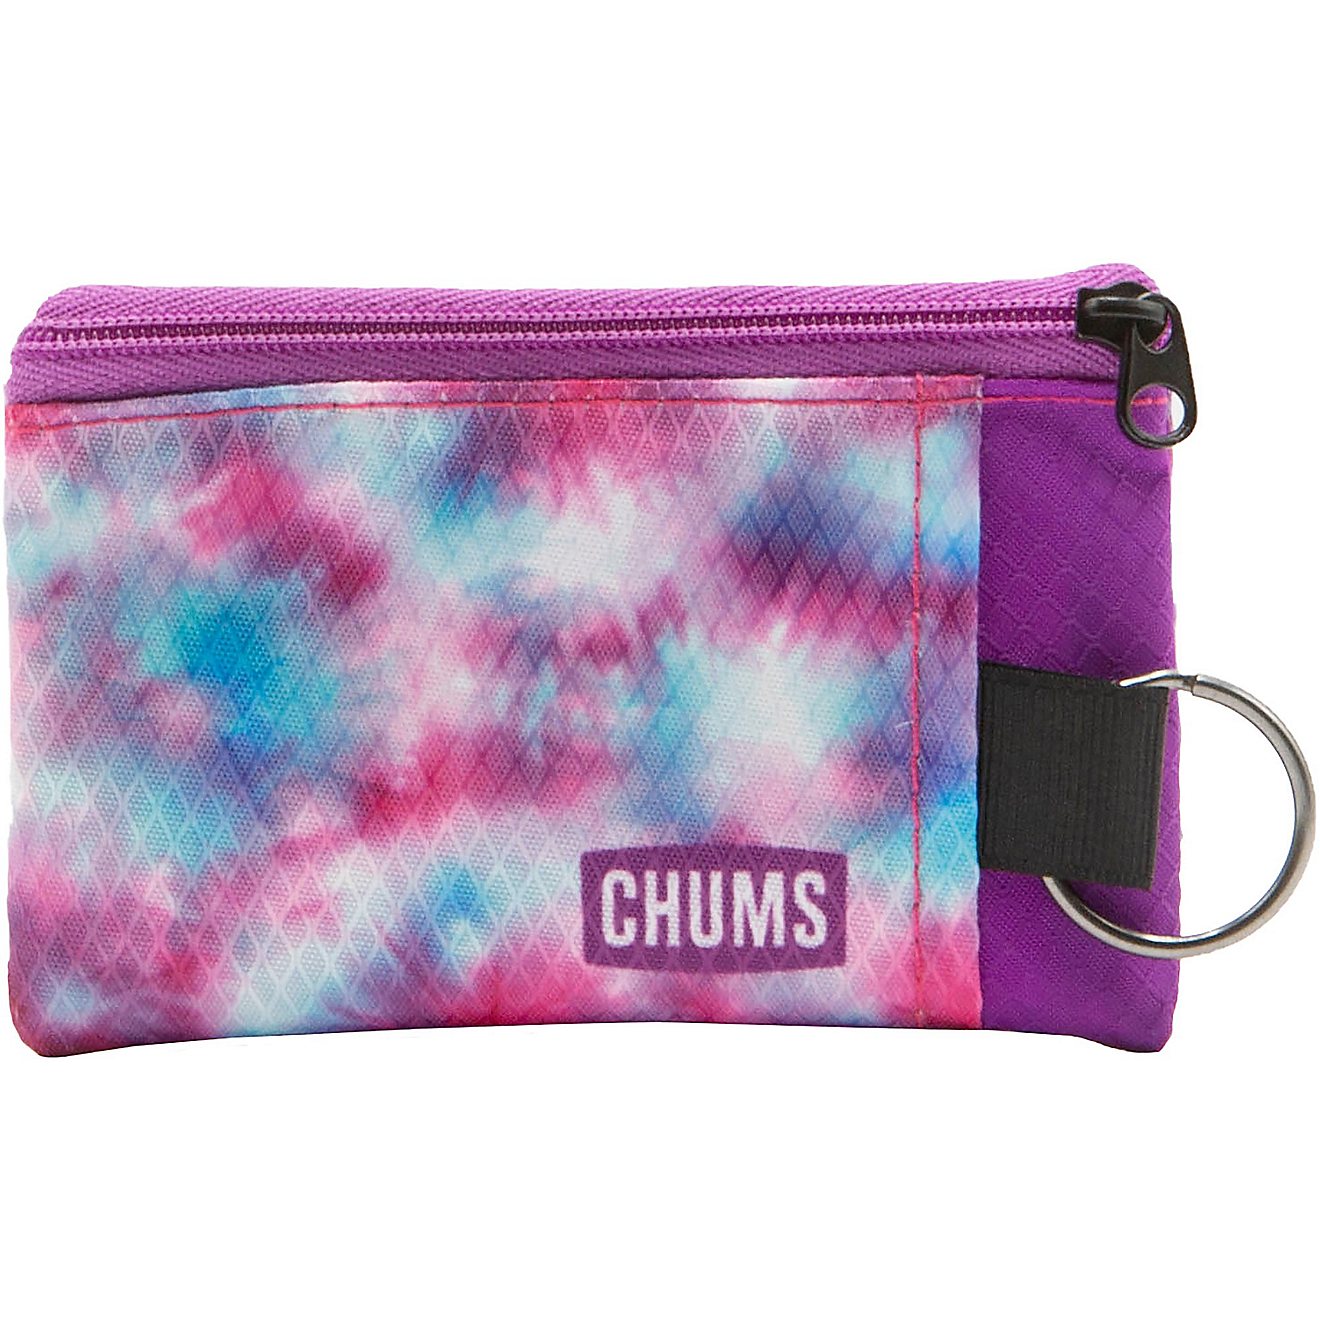 Chums Surfshort Wallet                                                                                                           - view number 4